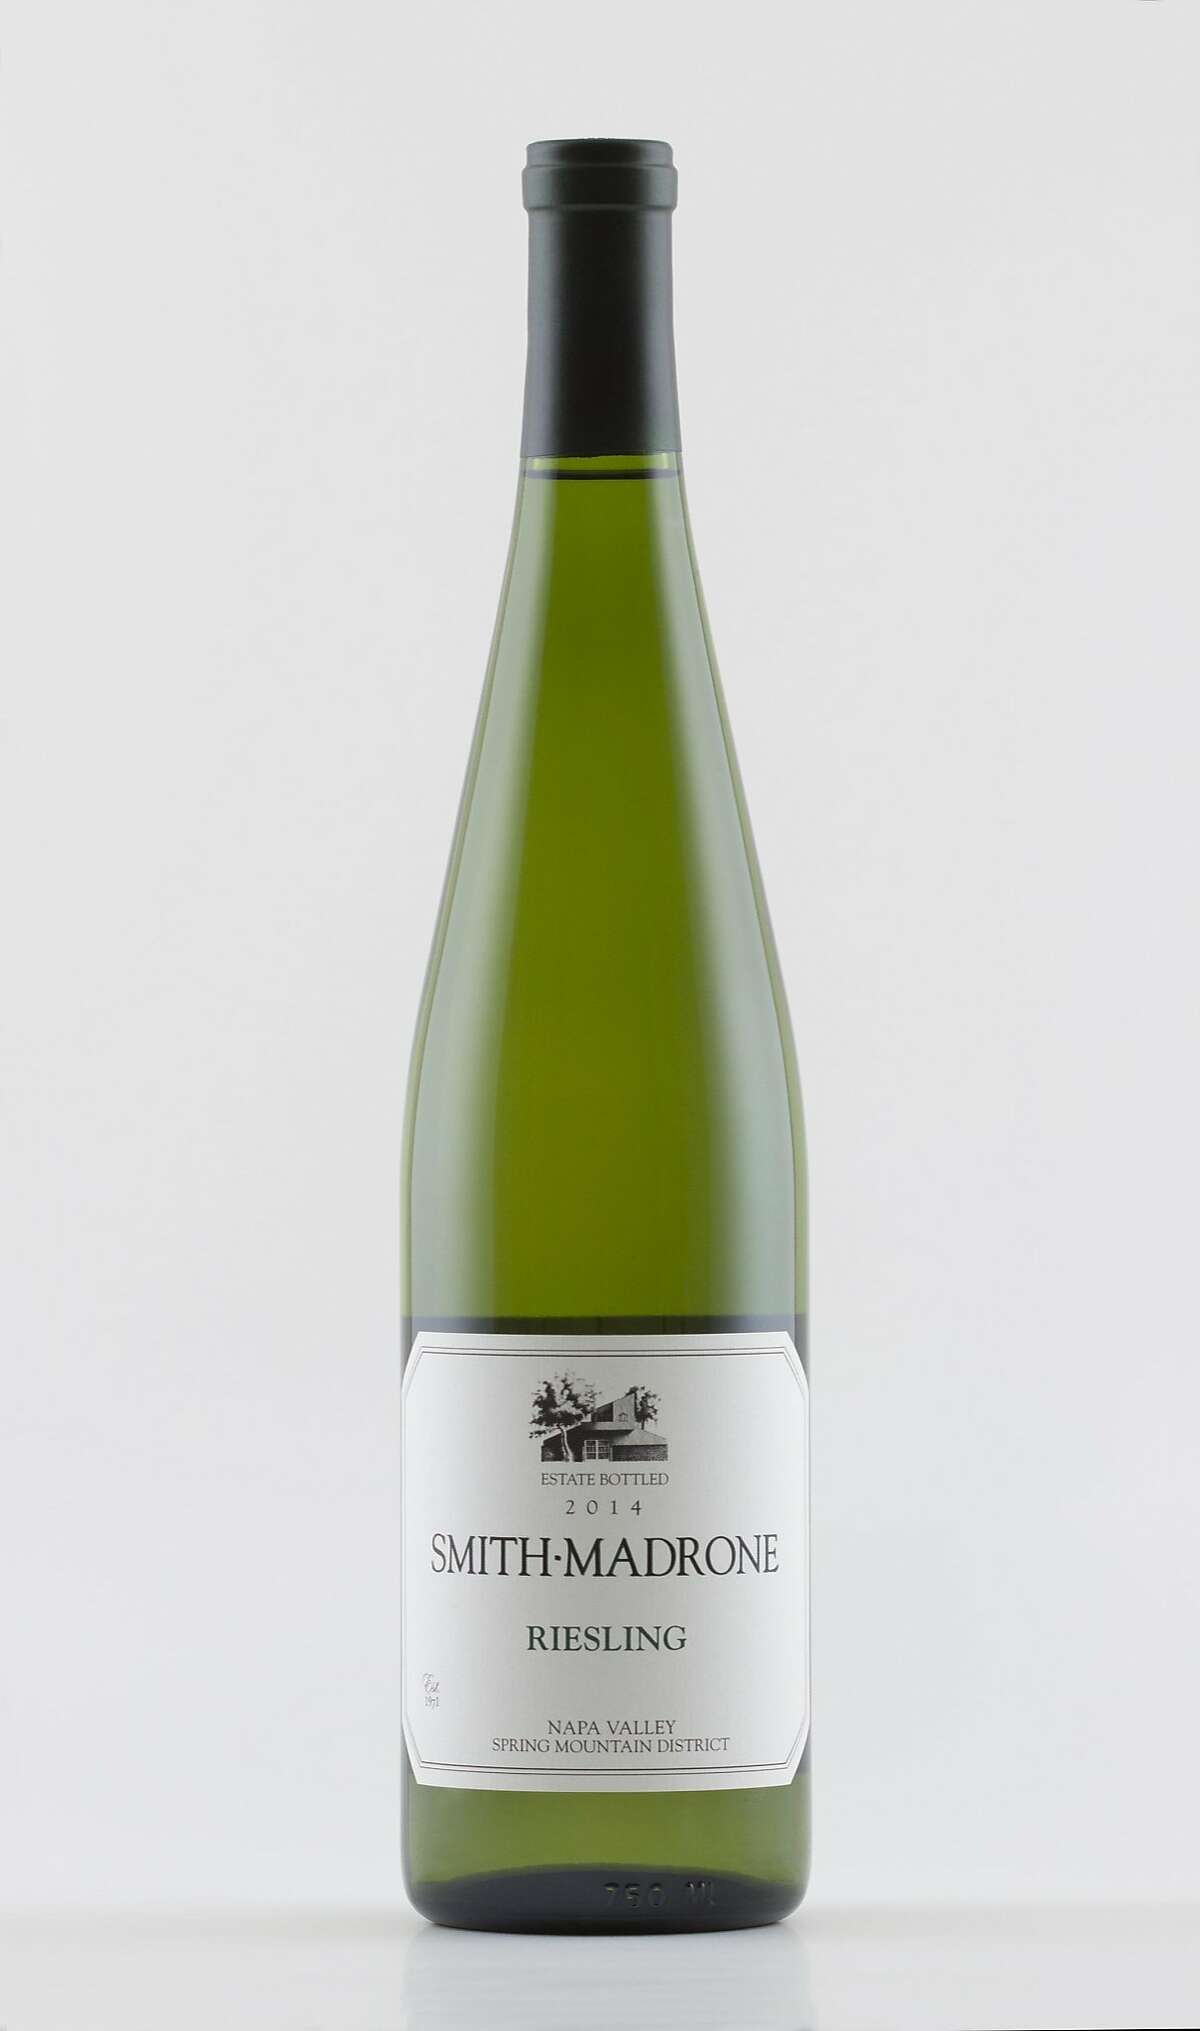 Smith-Madrone Riesling Spring Mountain District Napa Valley 2014